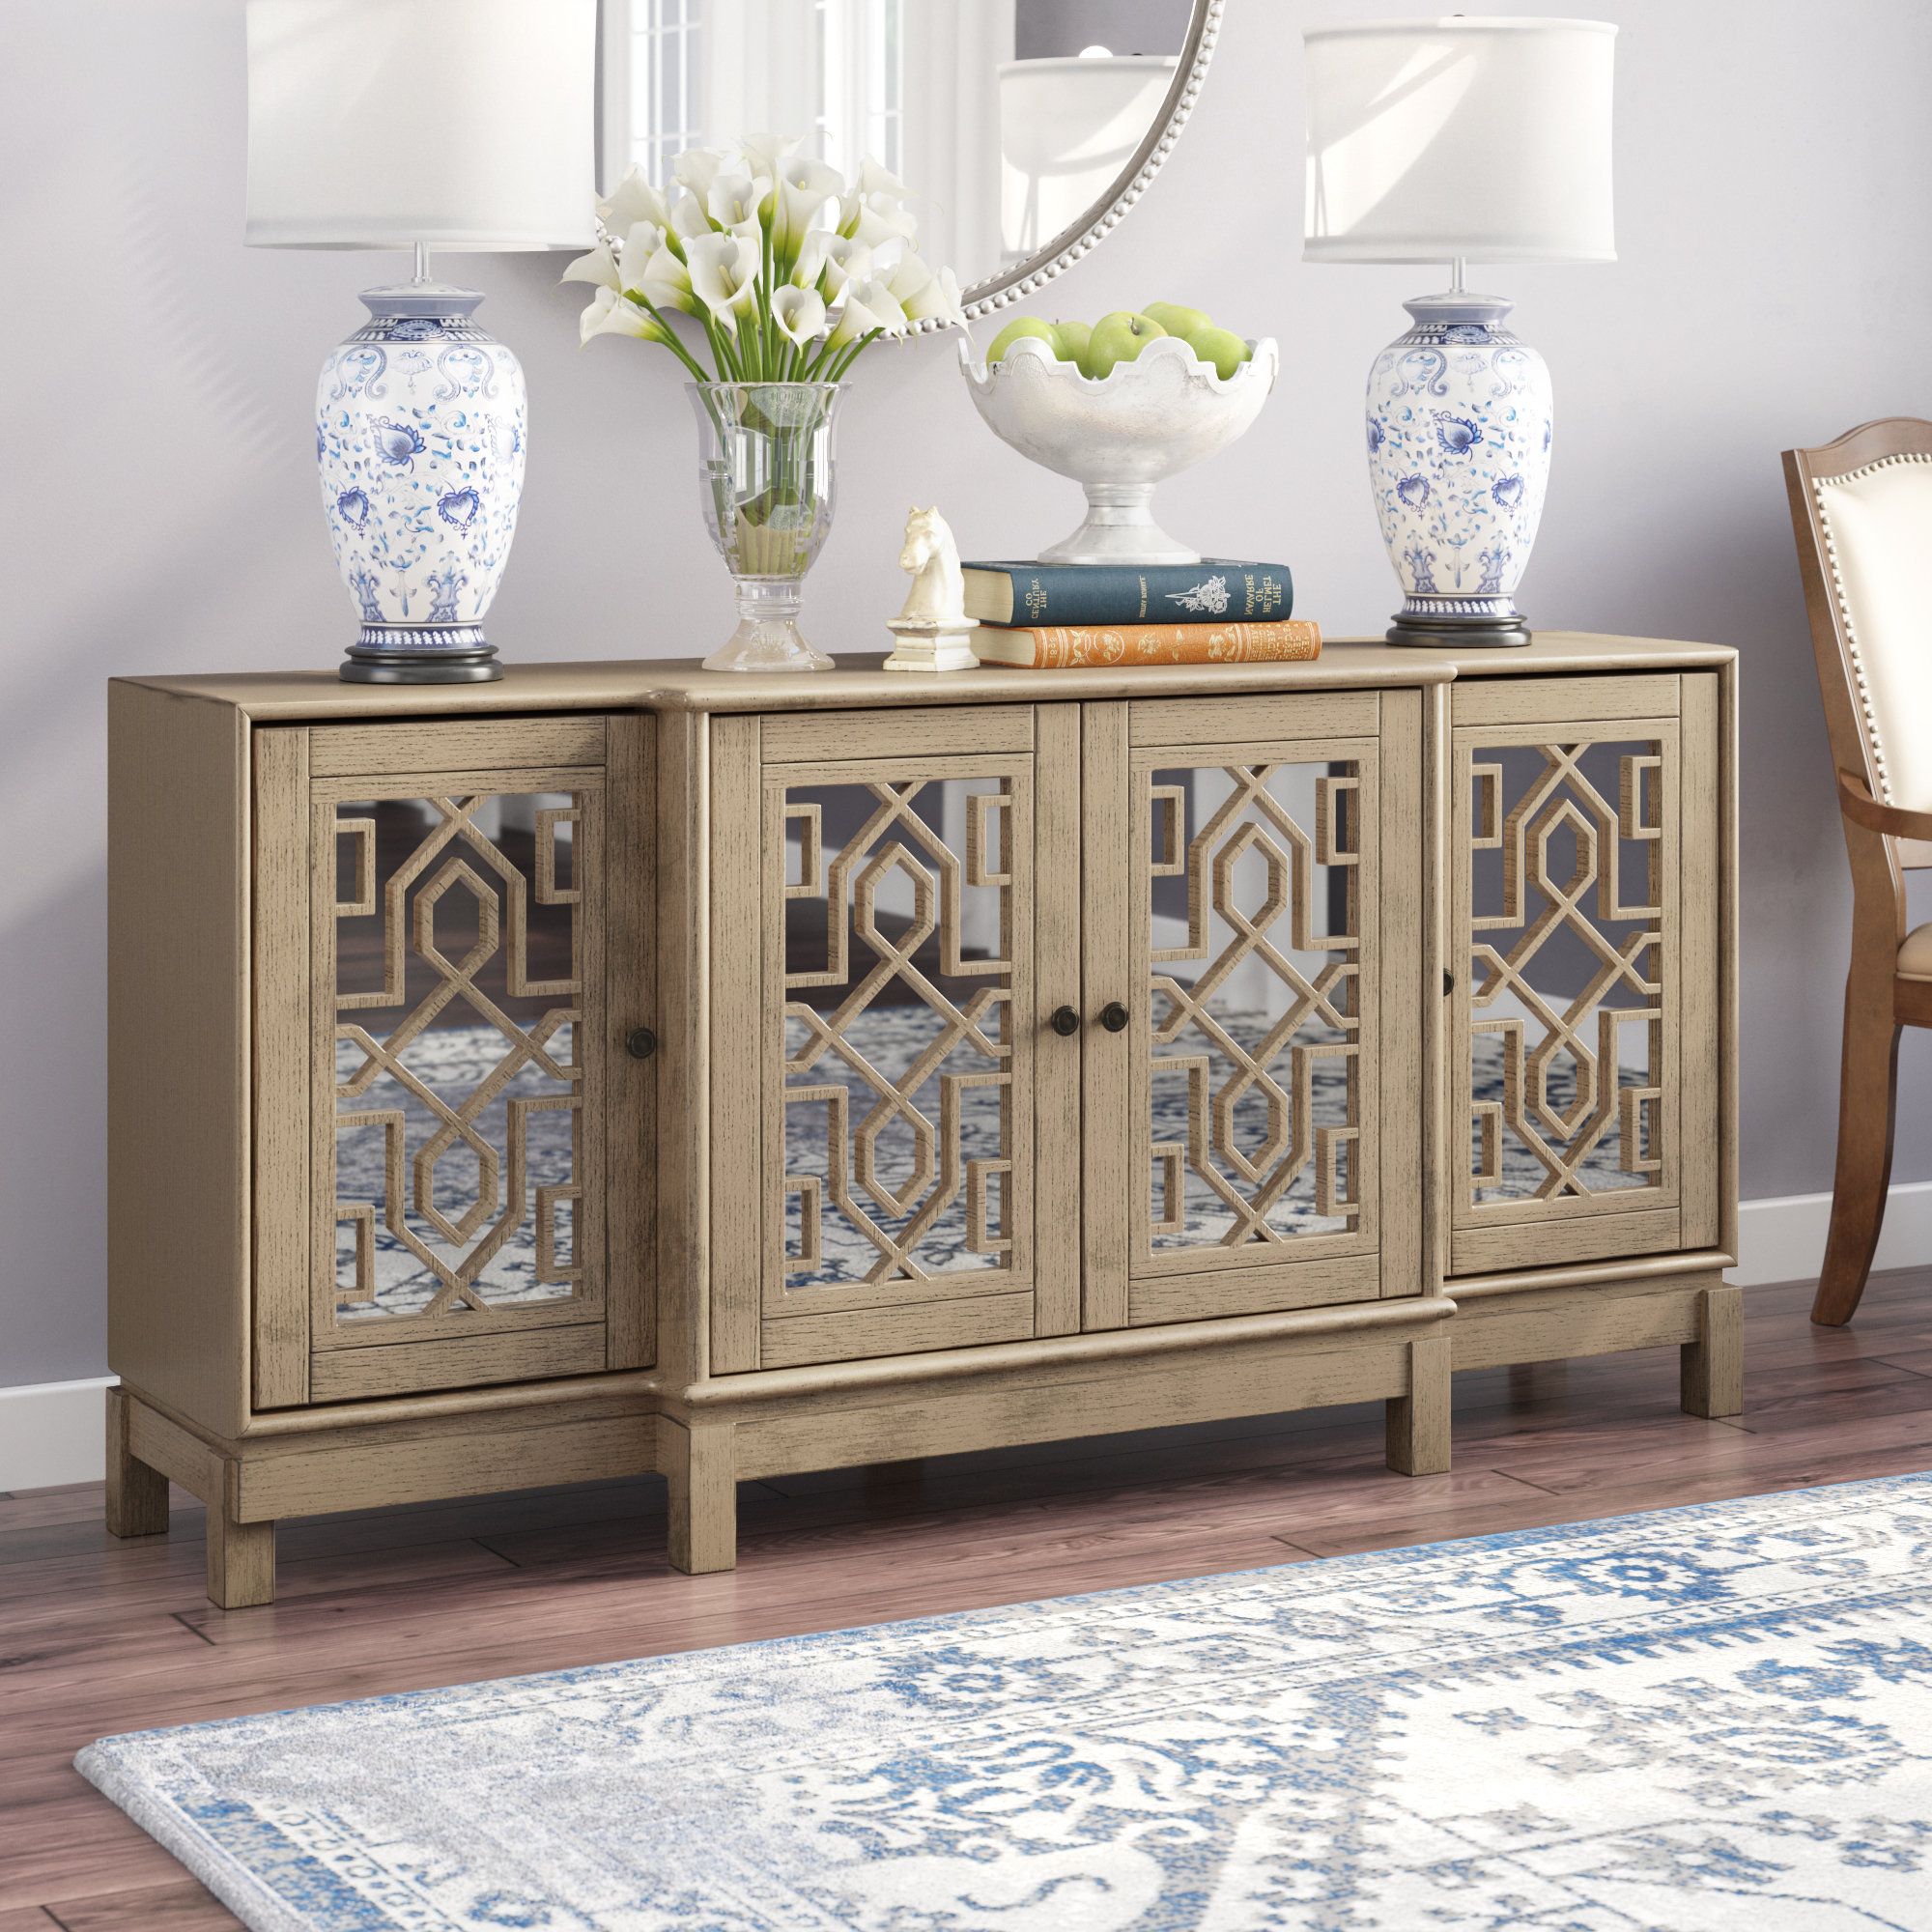 Gold & Silver Sideboards & Buffets You'll Love In 2019 | Wayfair Pertaining To Armelle Sideboards (Gallery 6 of 20)